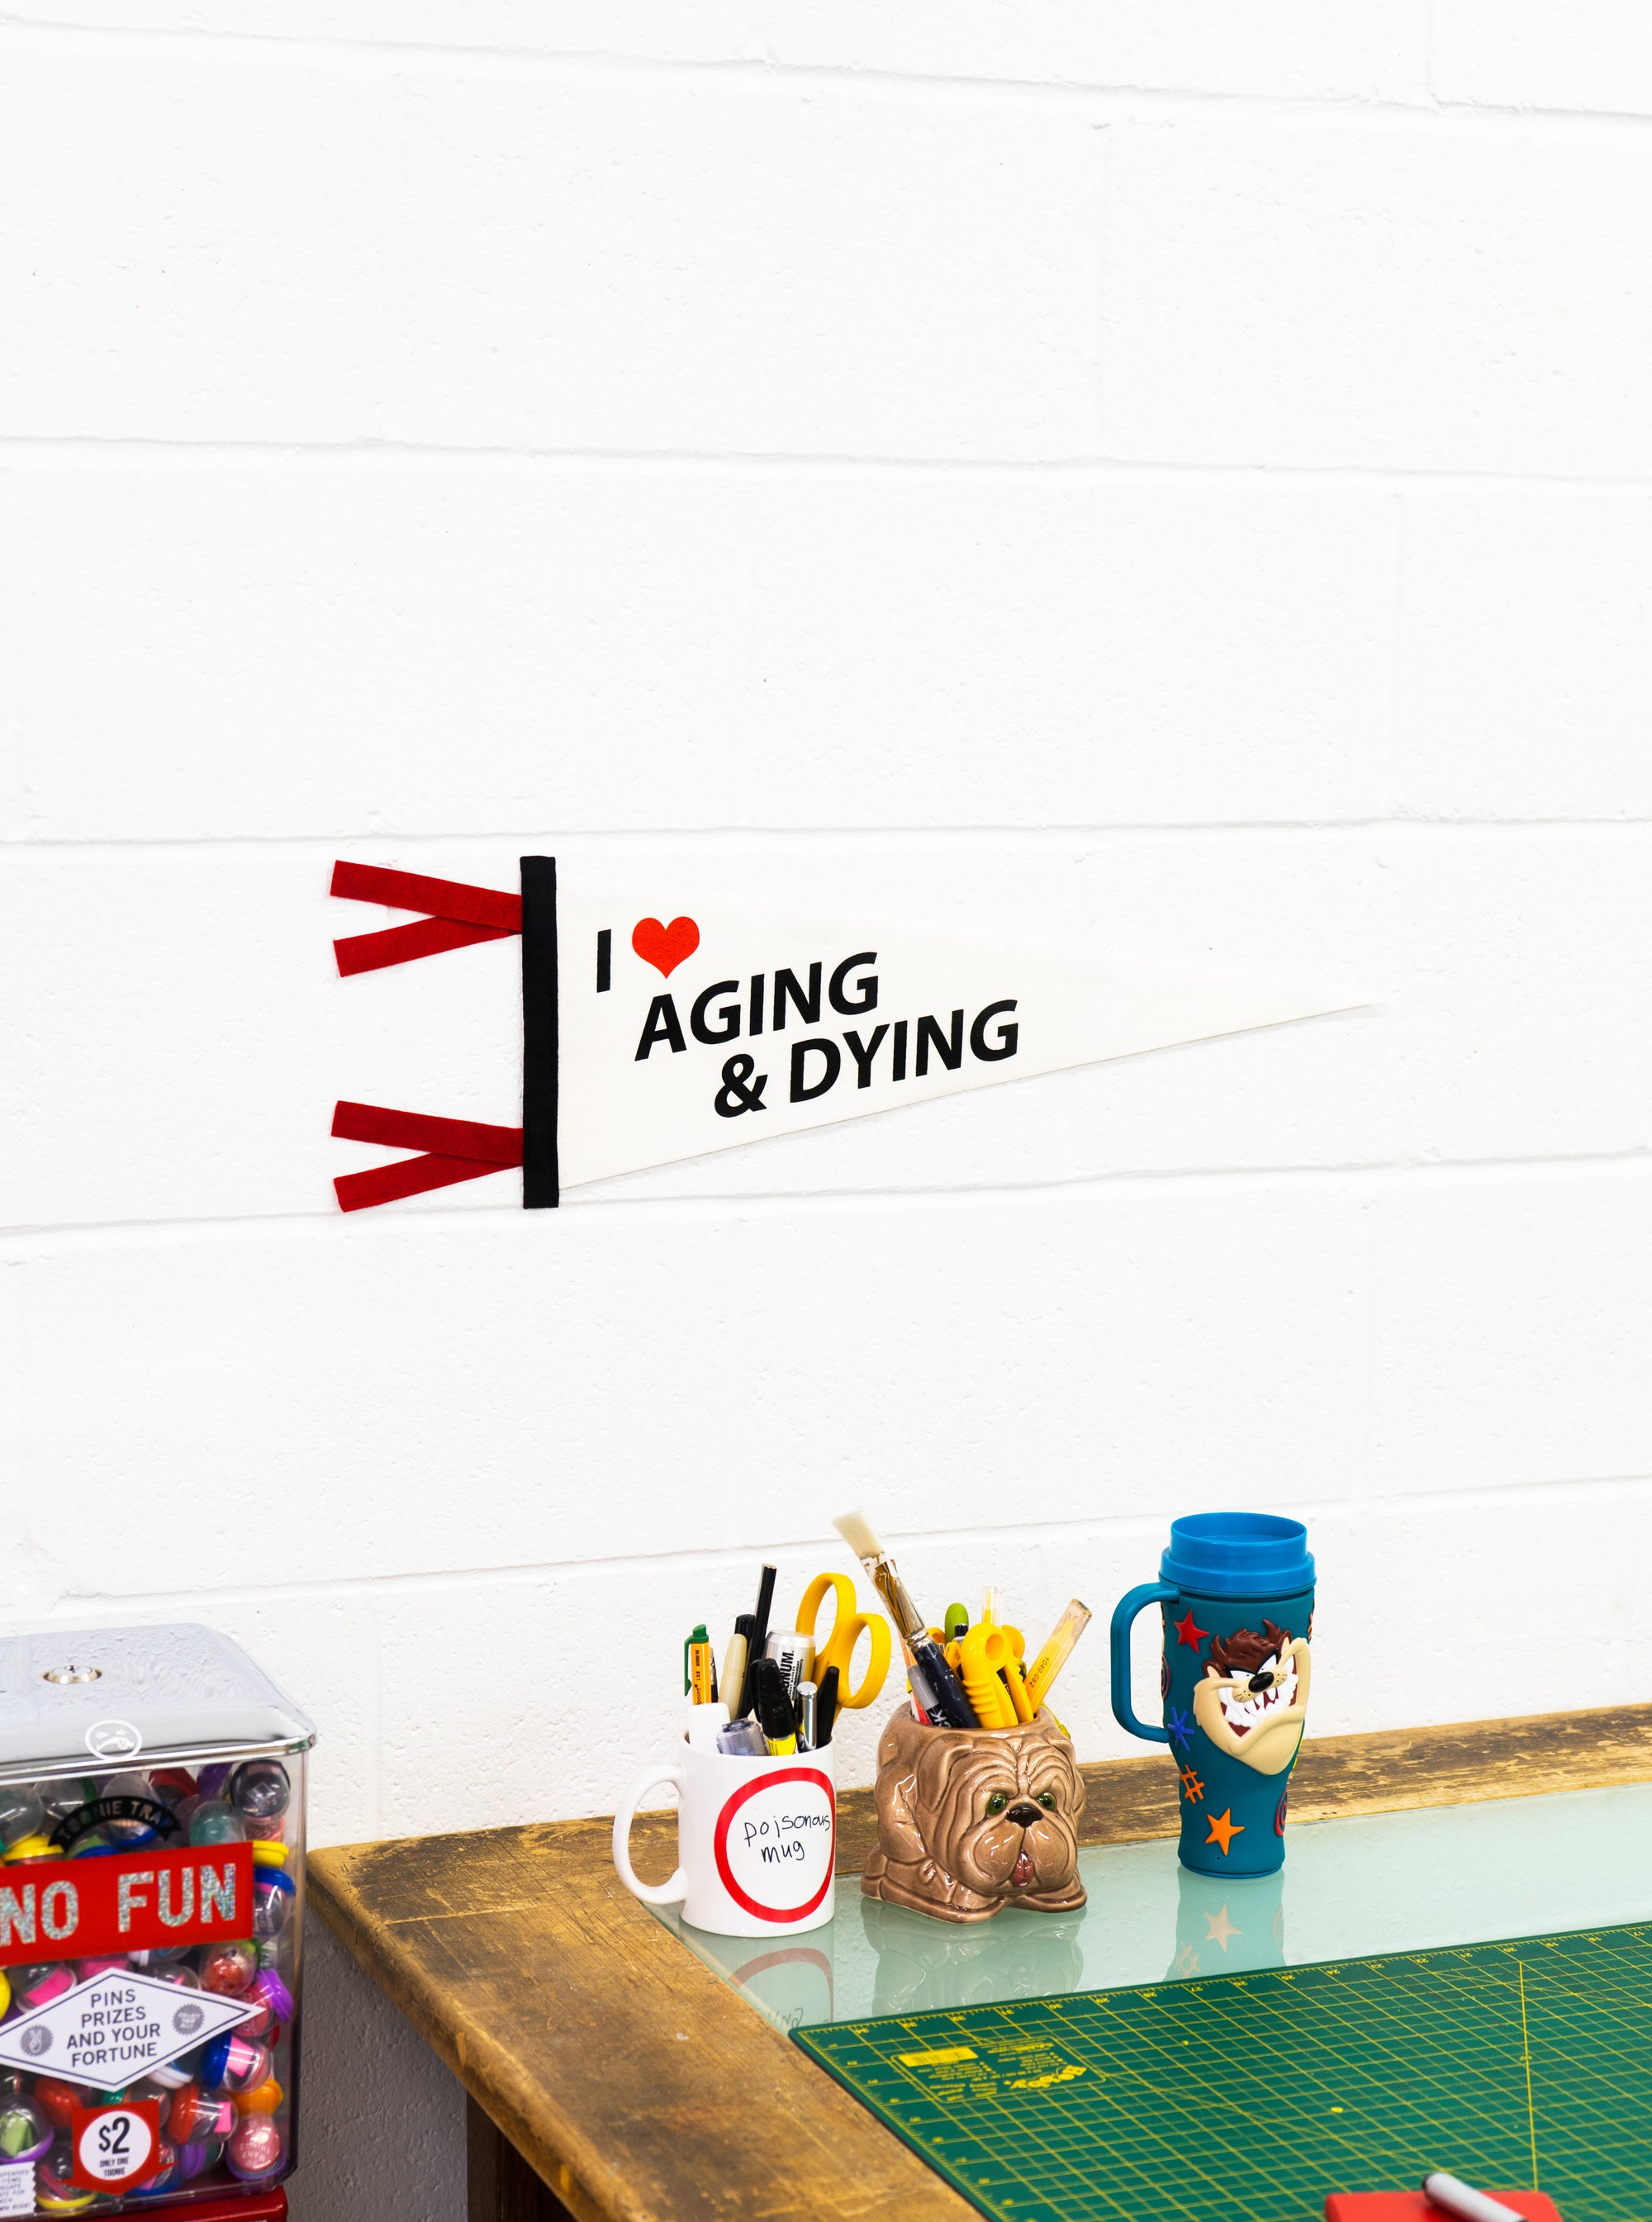 "Aging & Dying" Pennant